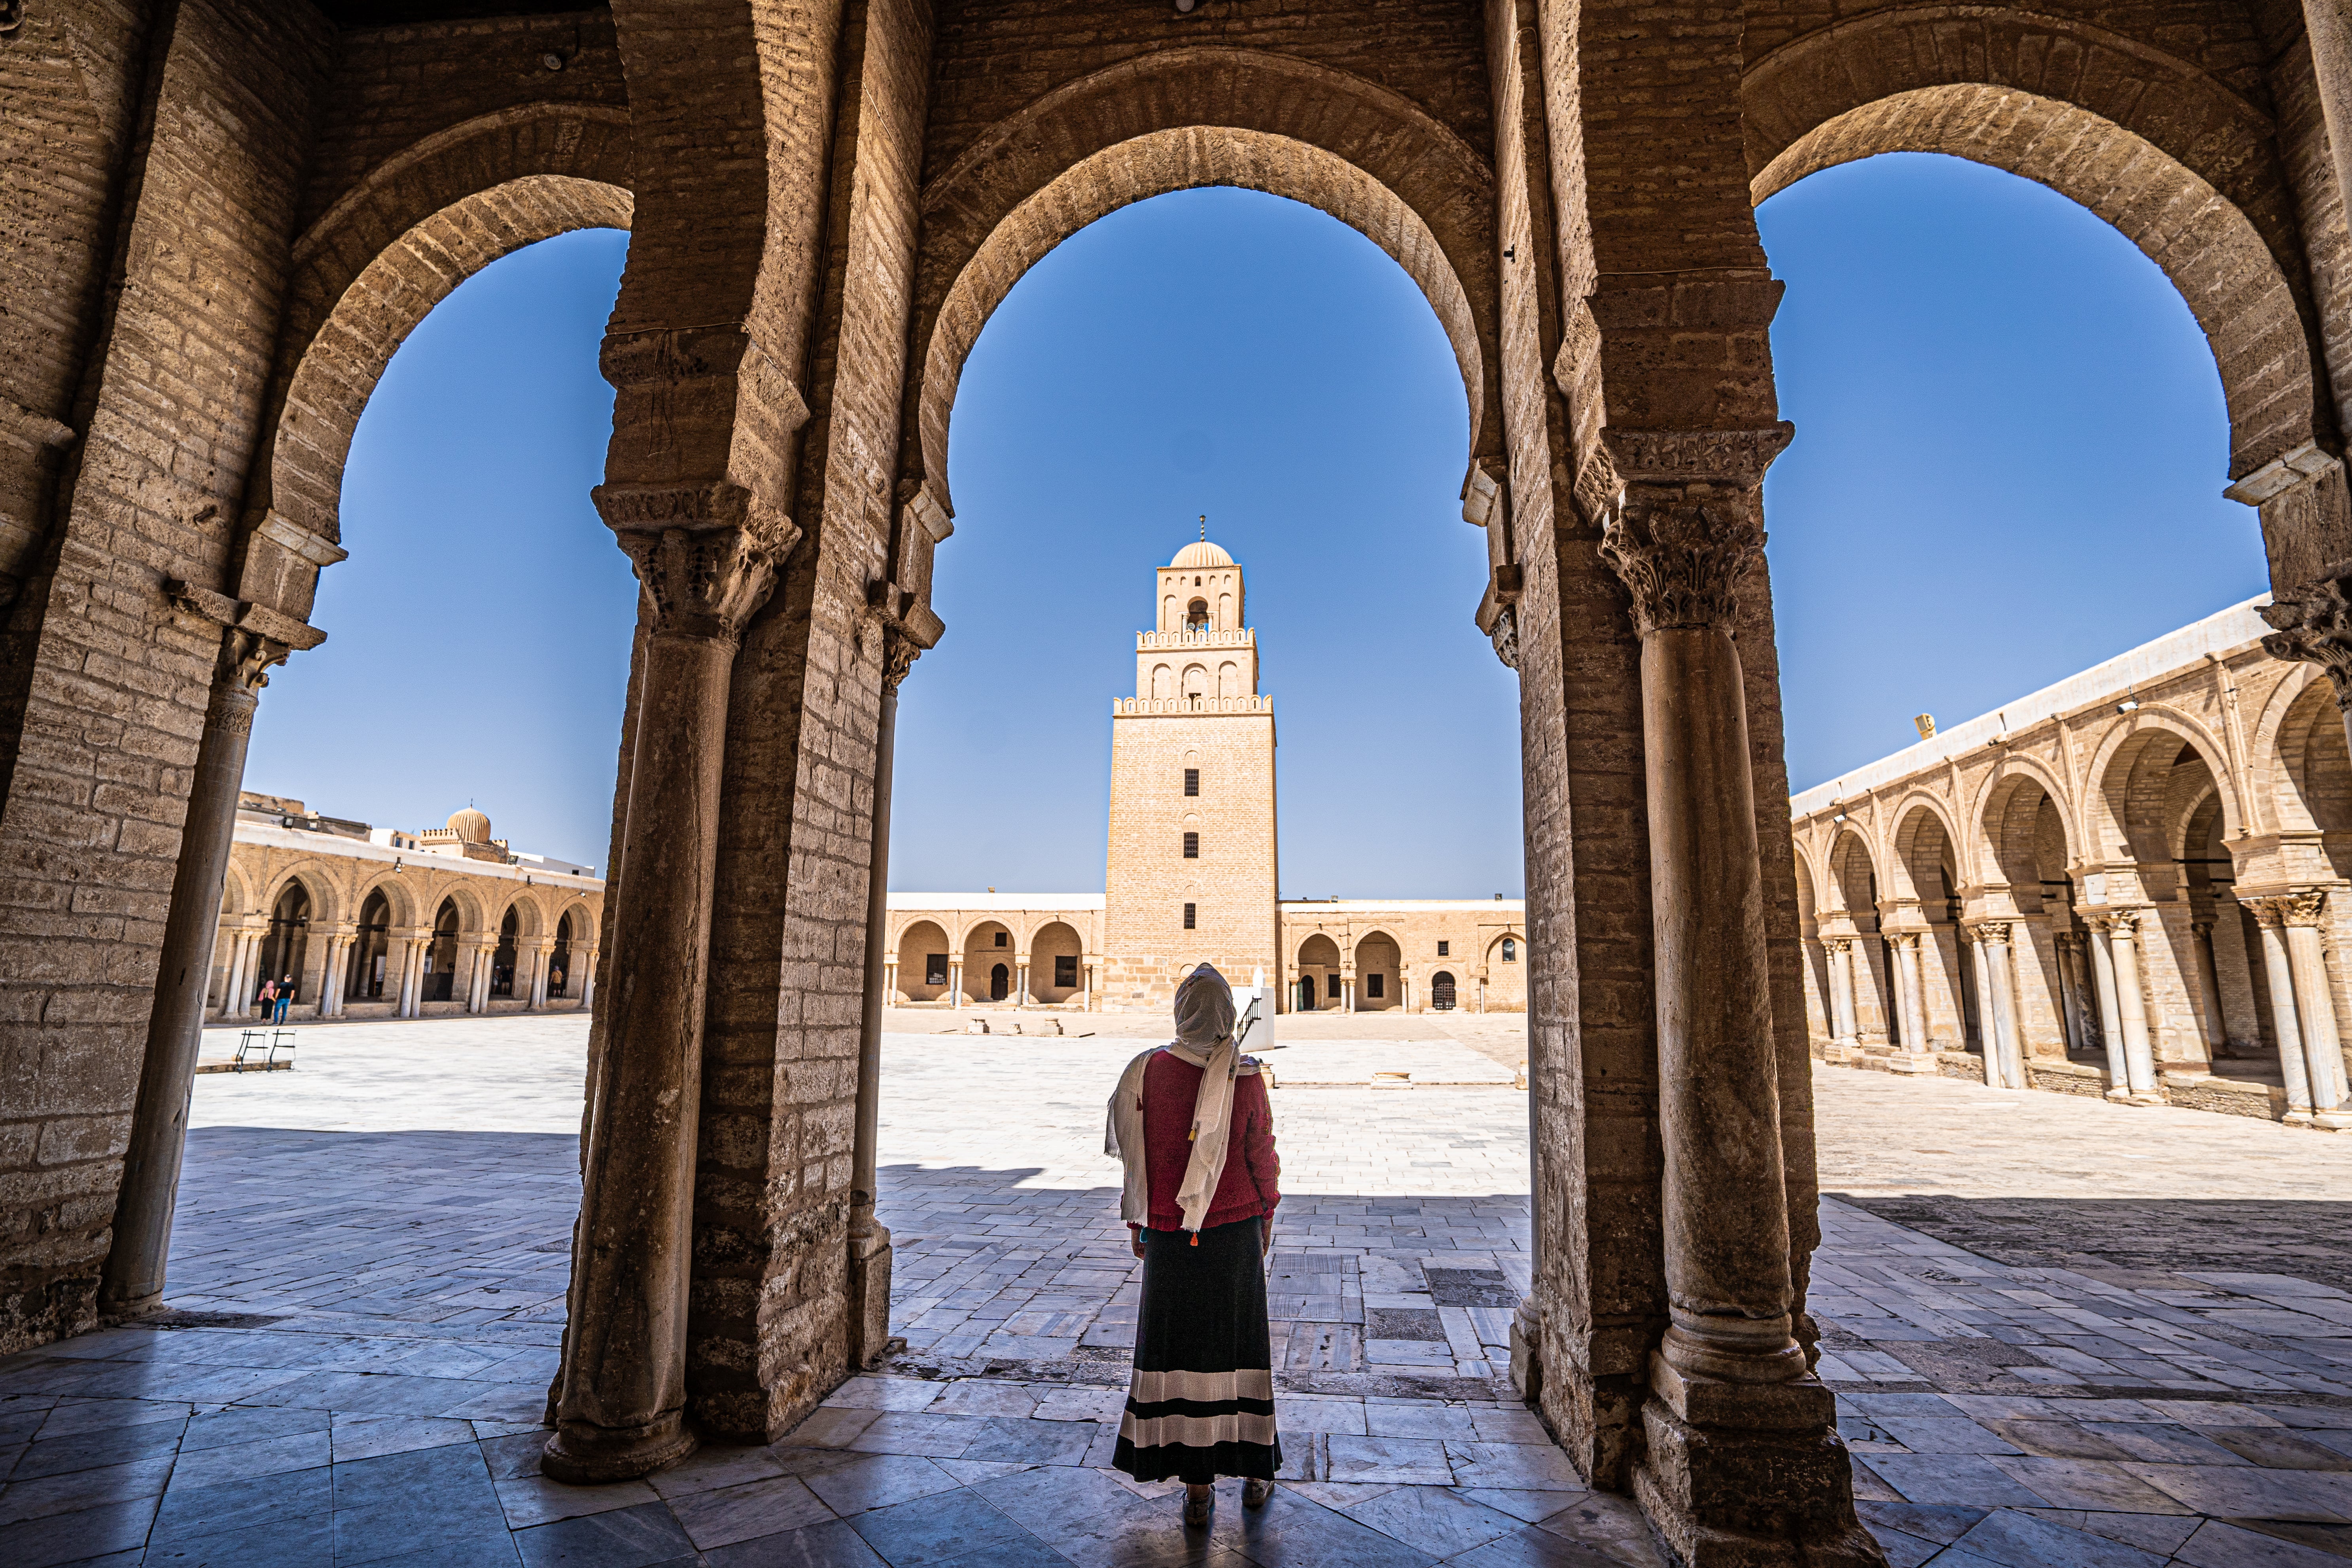 Kairouan’s seventh-century mosque was built using Phoenician columns and Roman marble pillaged from Carthage